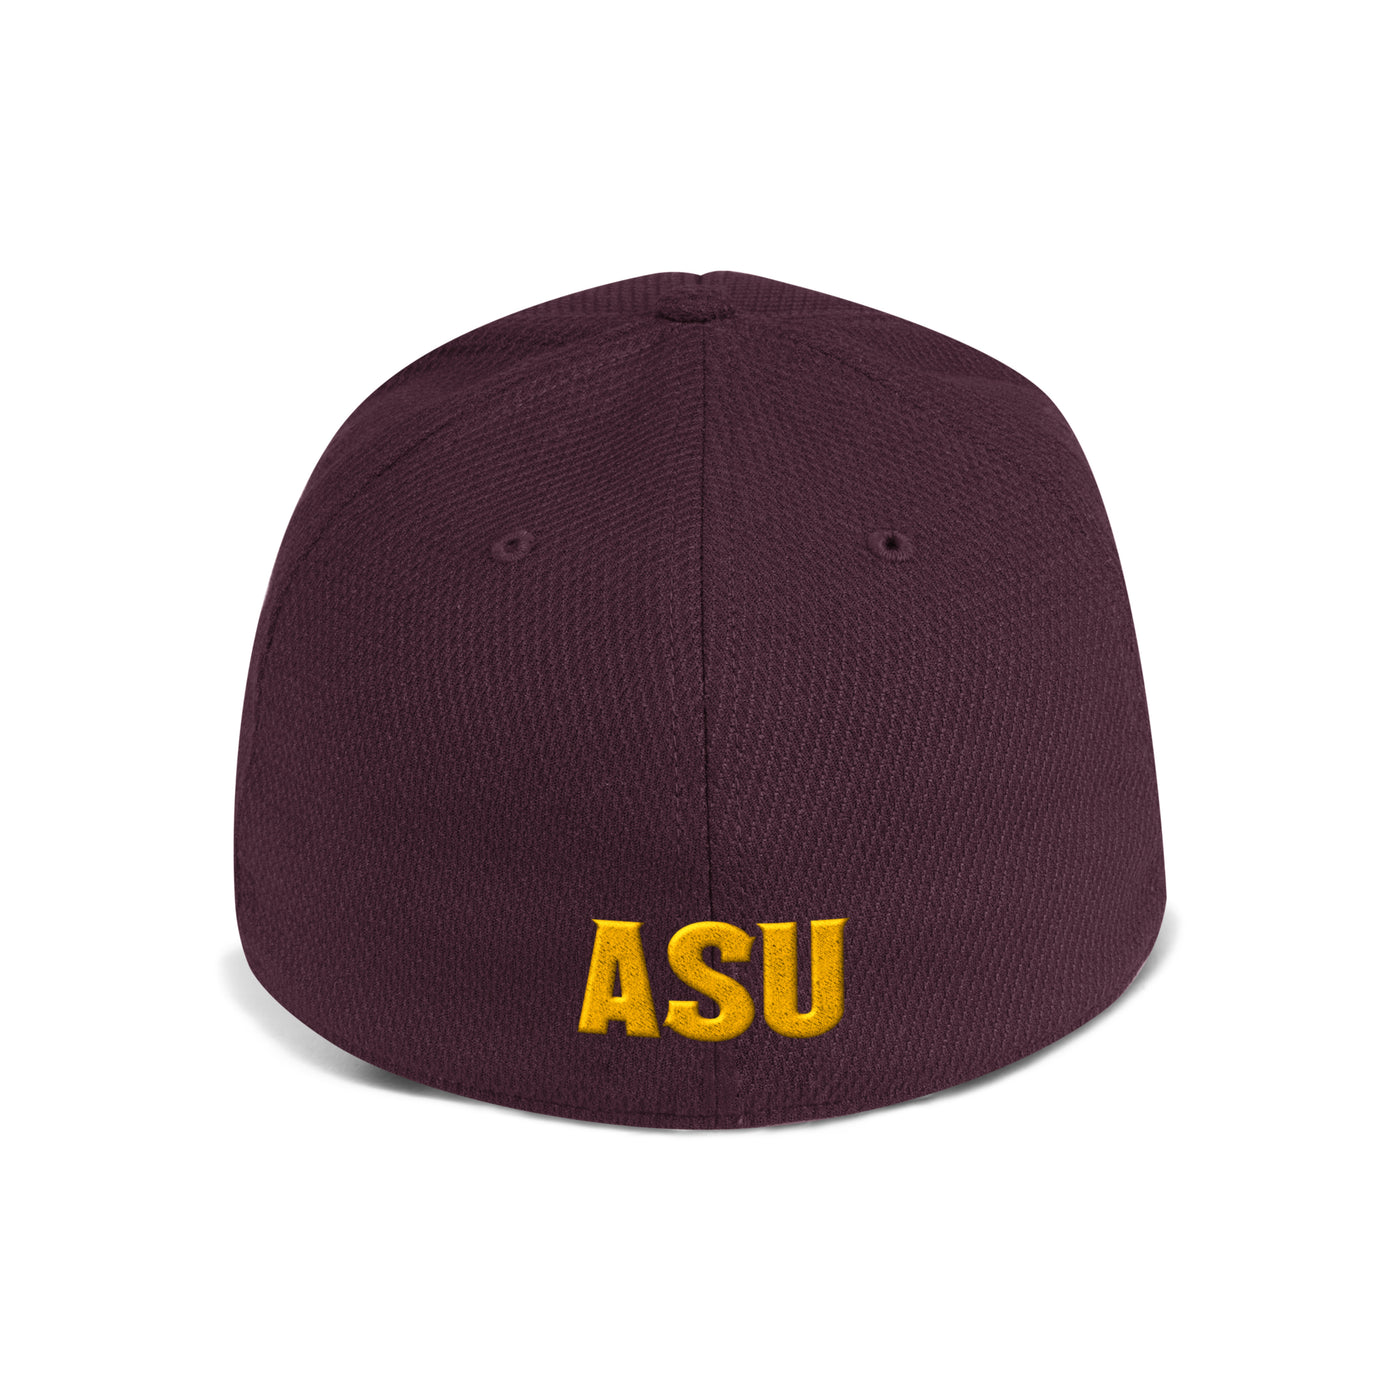 Back of Maroon hat with gold 